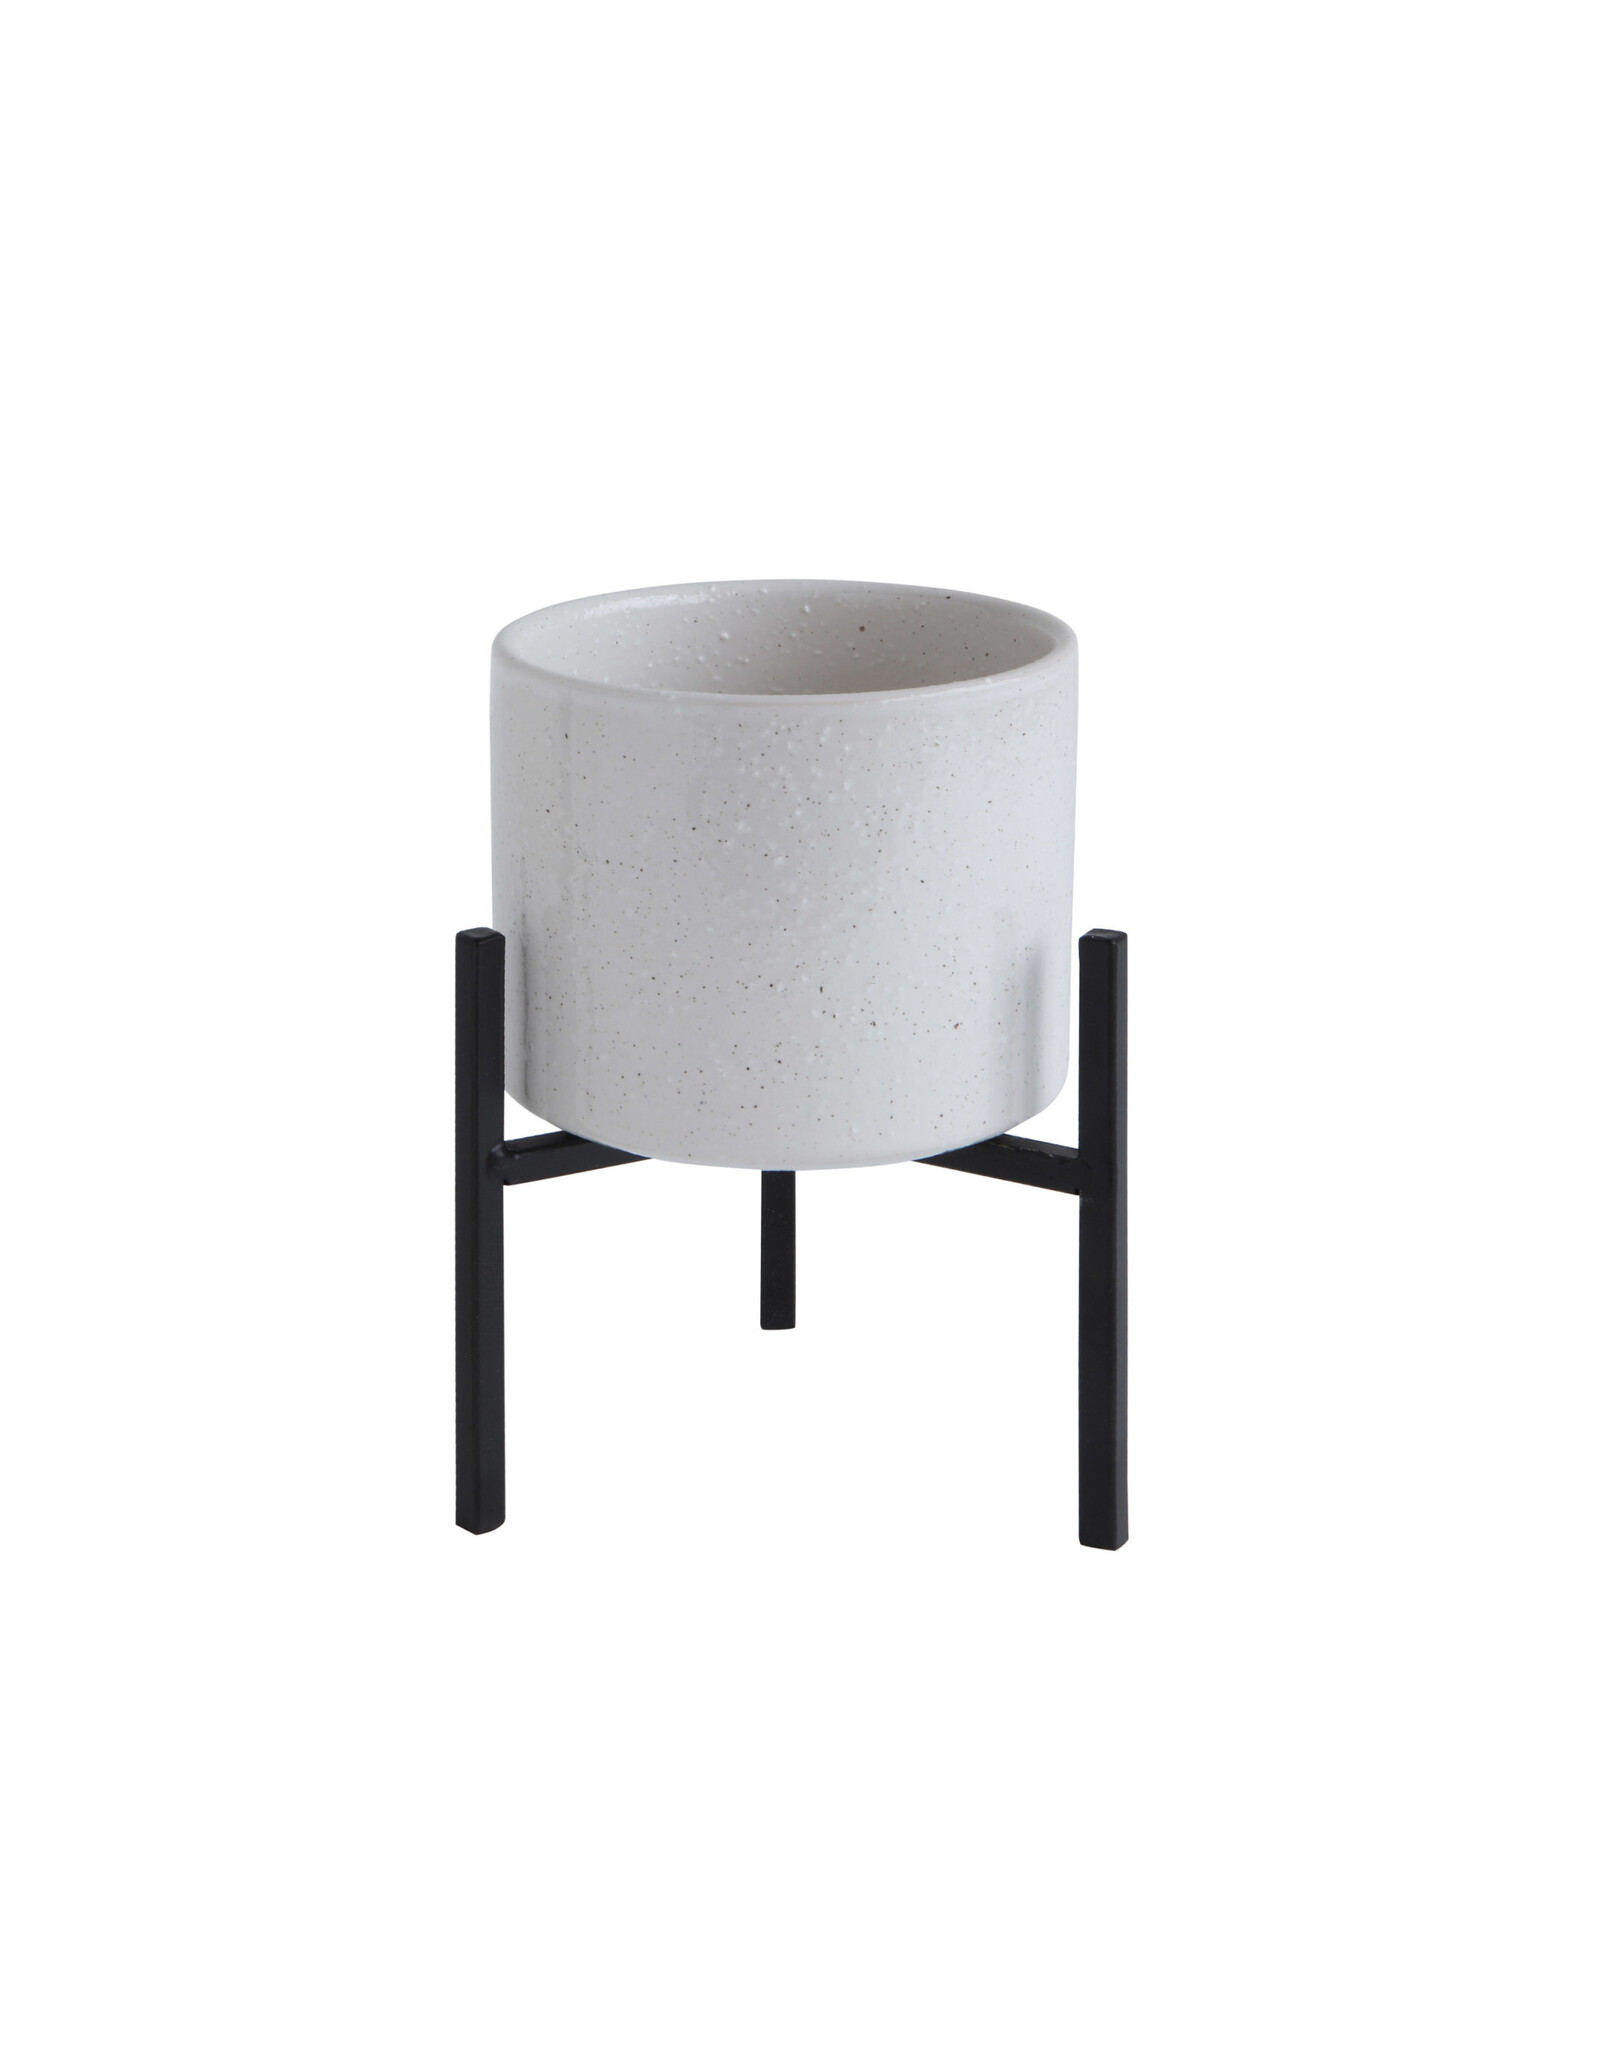 Planter with Metal Stand AH0057